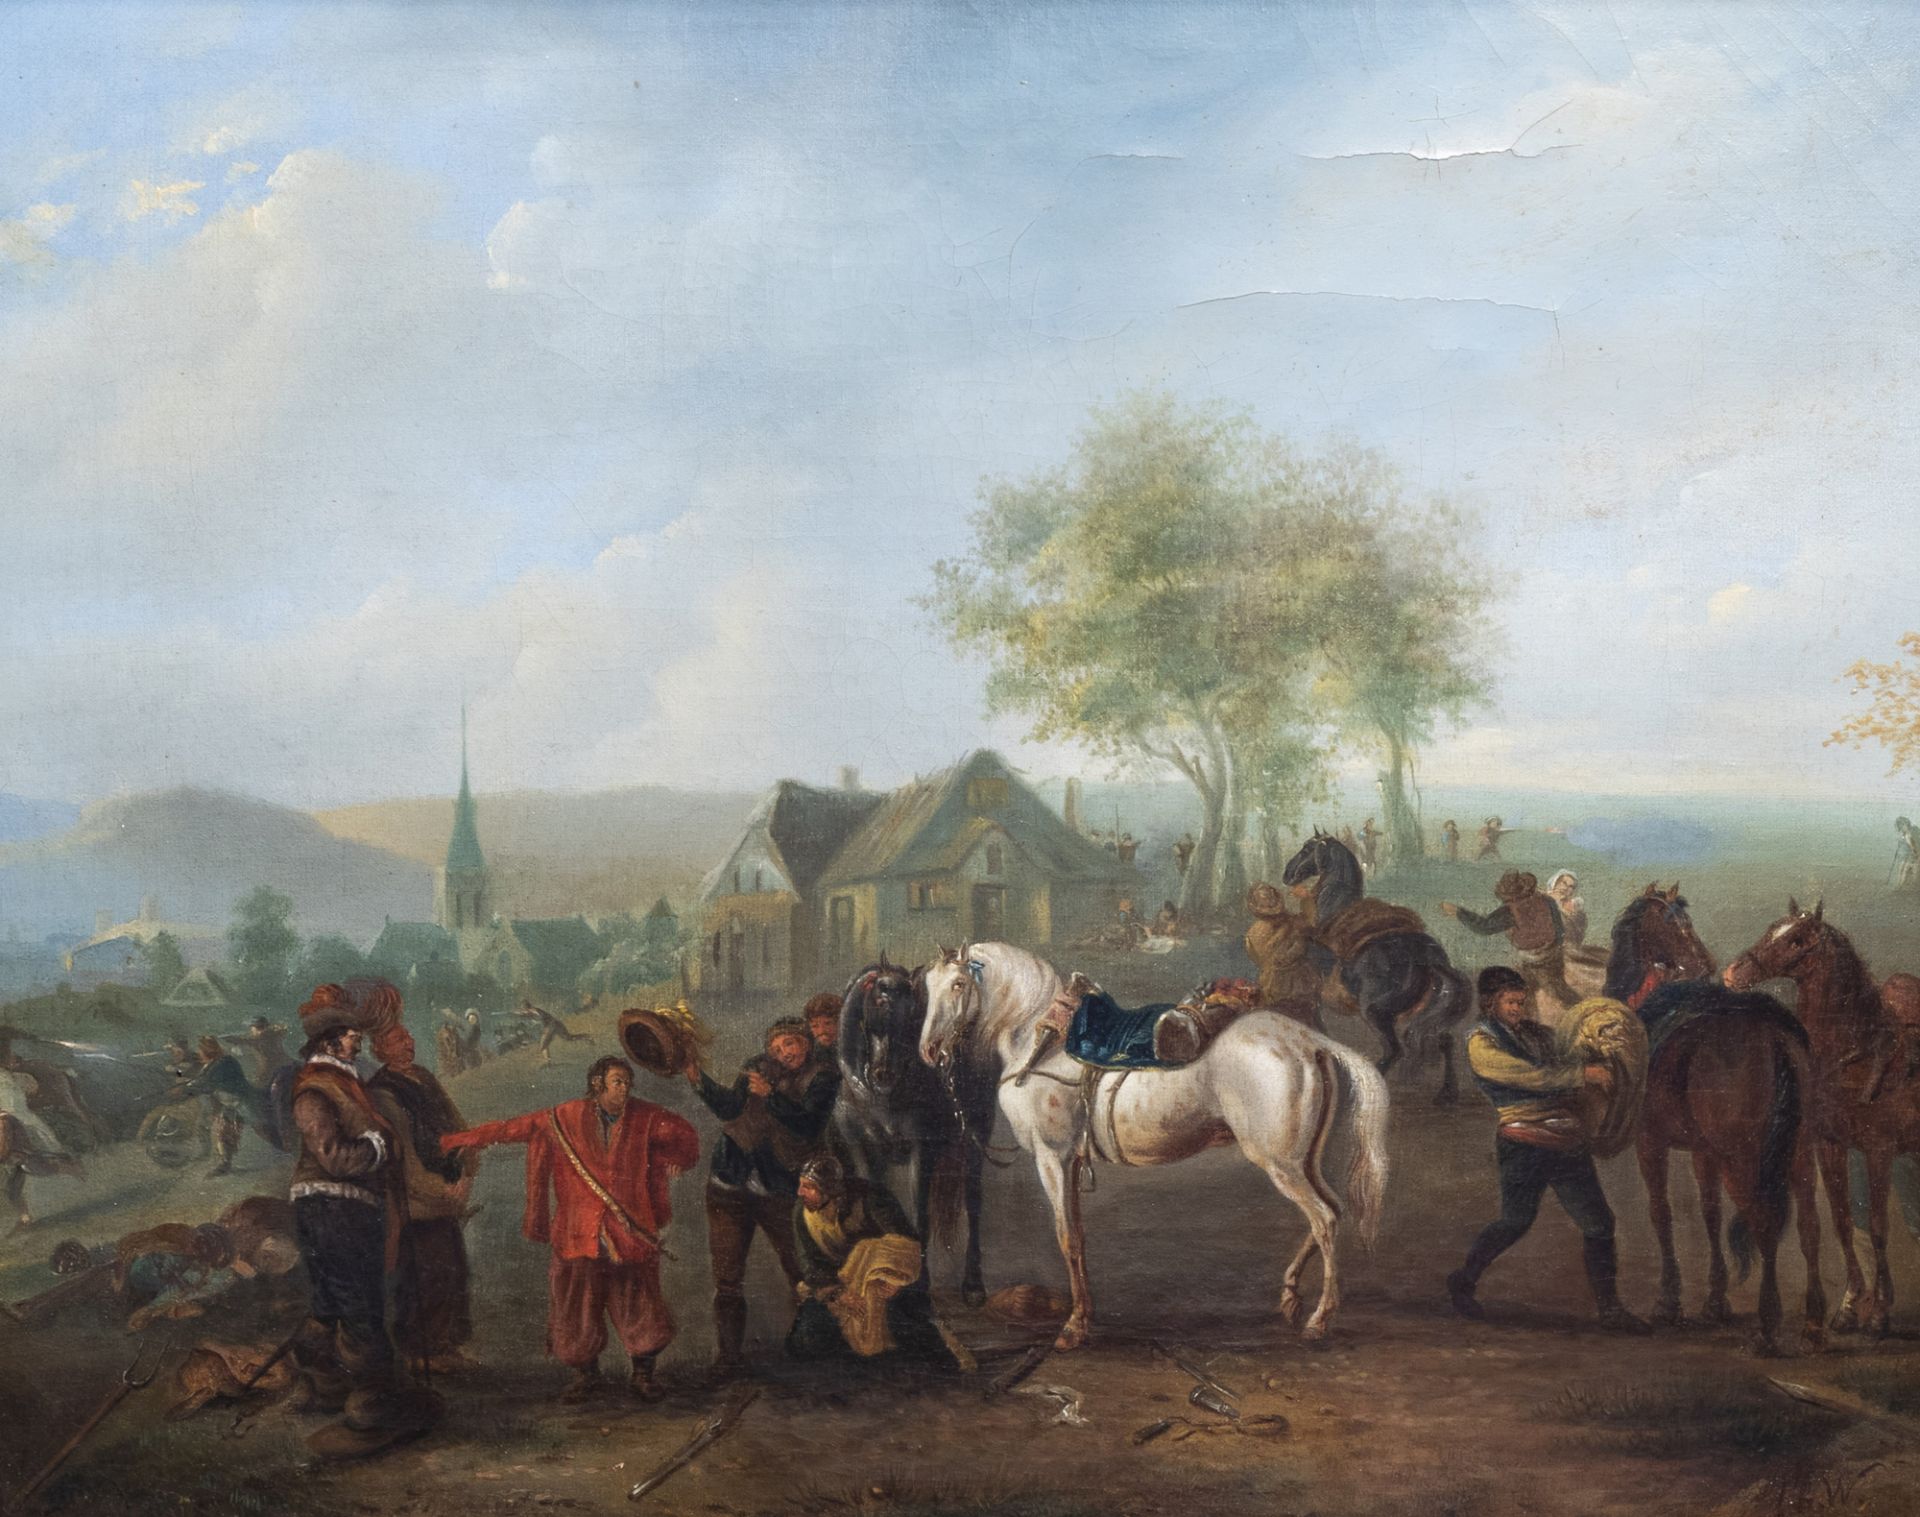 Dutch school, in the manner of Philips Wouwerman (1619-1668): The spoils of war, oil on canvas, 17th